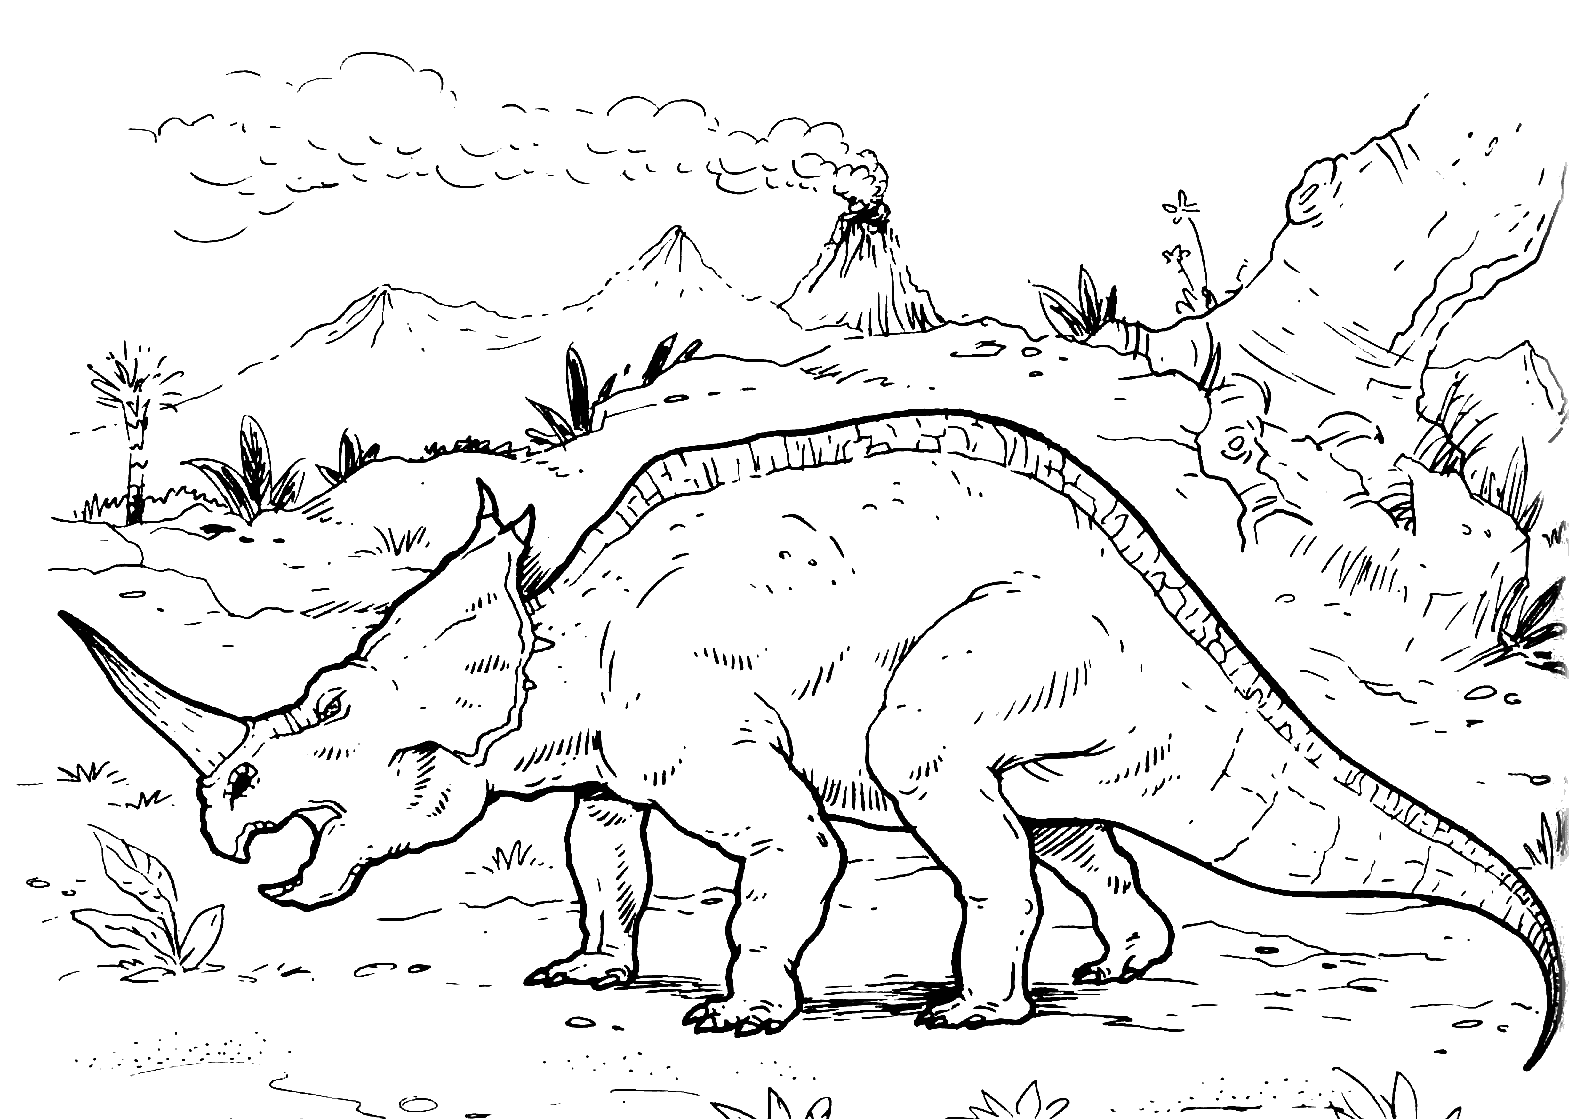 Coloring page - Centrosaurus is traveling the world